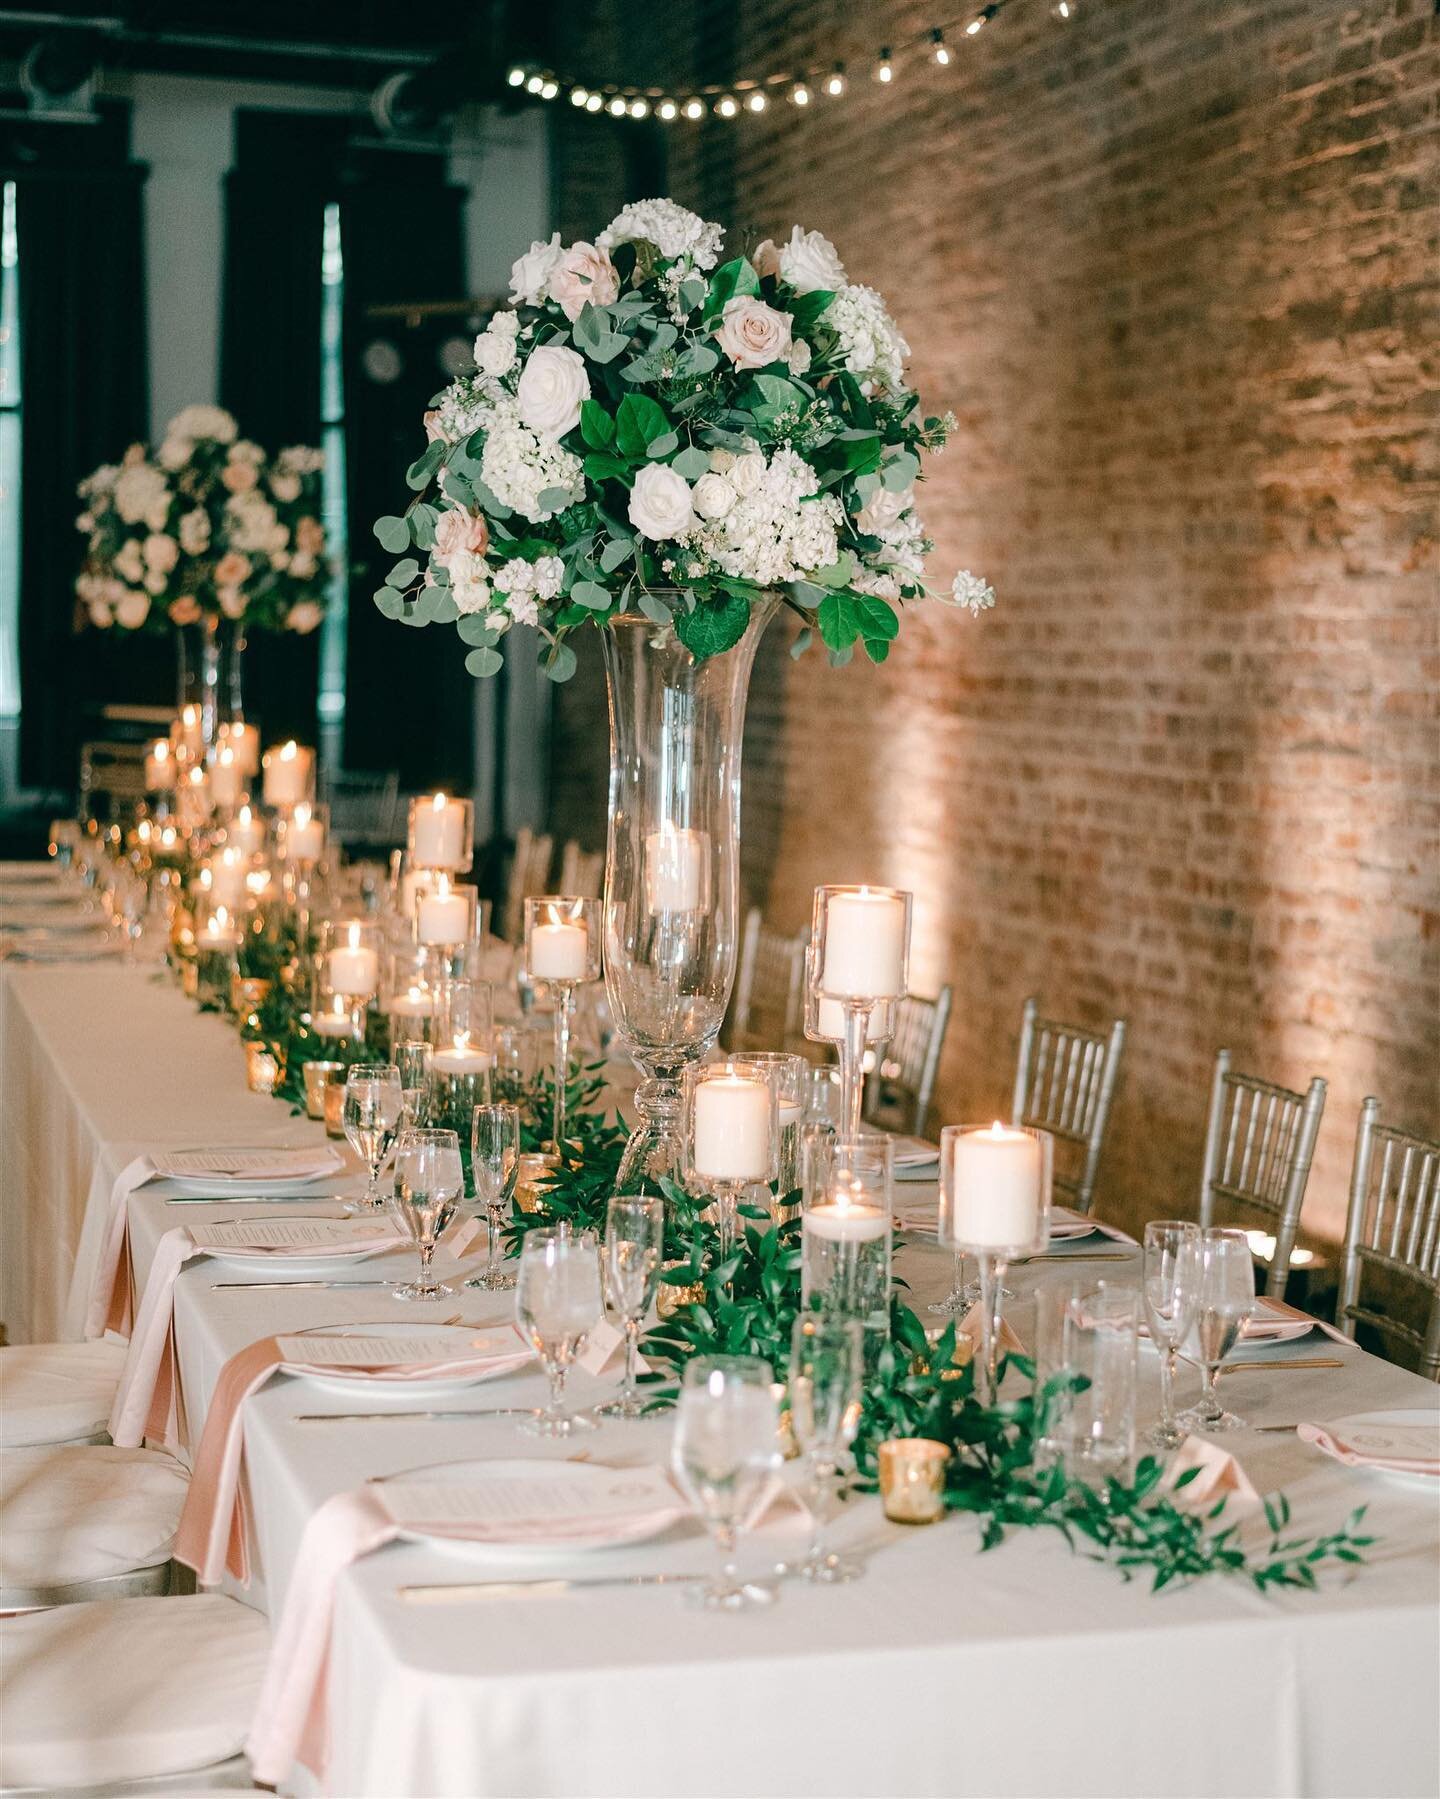 Happy December! 🎄 We're in the midst of holiday events, year-end weddings, and preparing for 2023. What does 2023 have in store for you?

Planner: @simplyevents
Photographer: @brittanybaysphotography
Cinematographer: @elegantproductionsfilm
Florist: